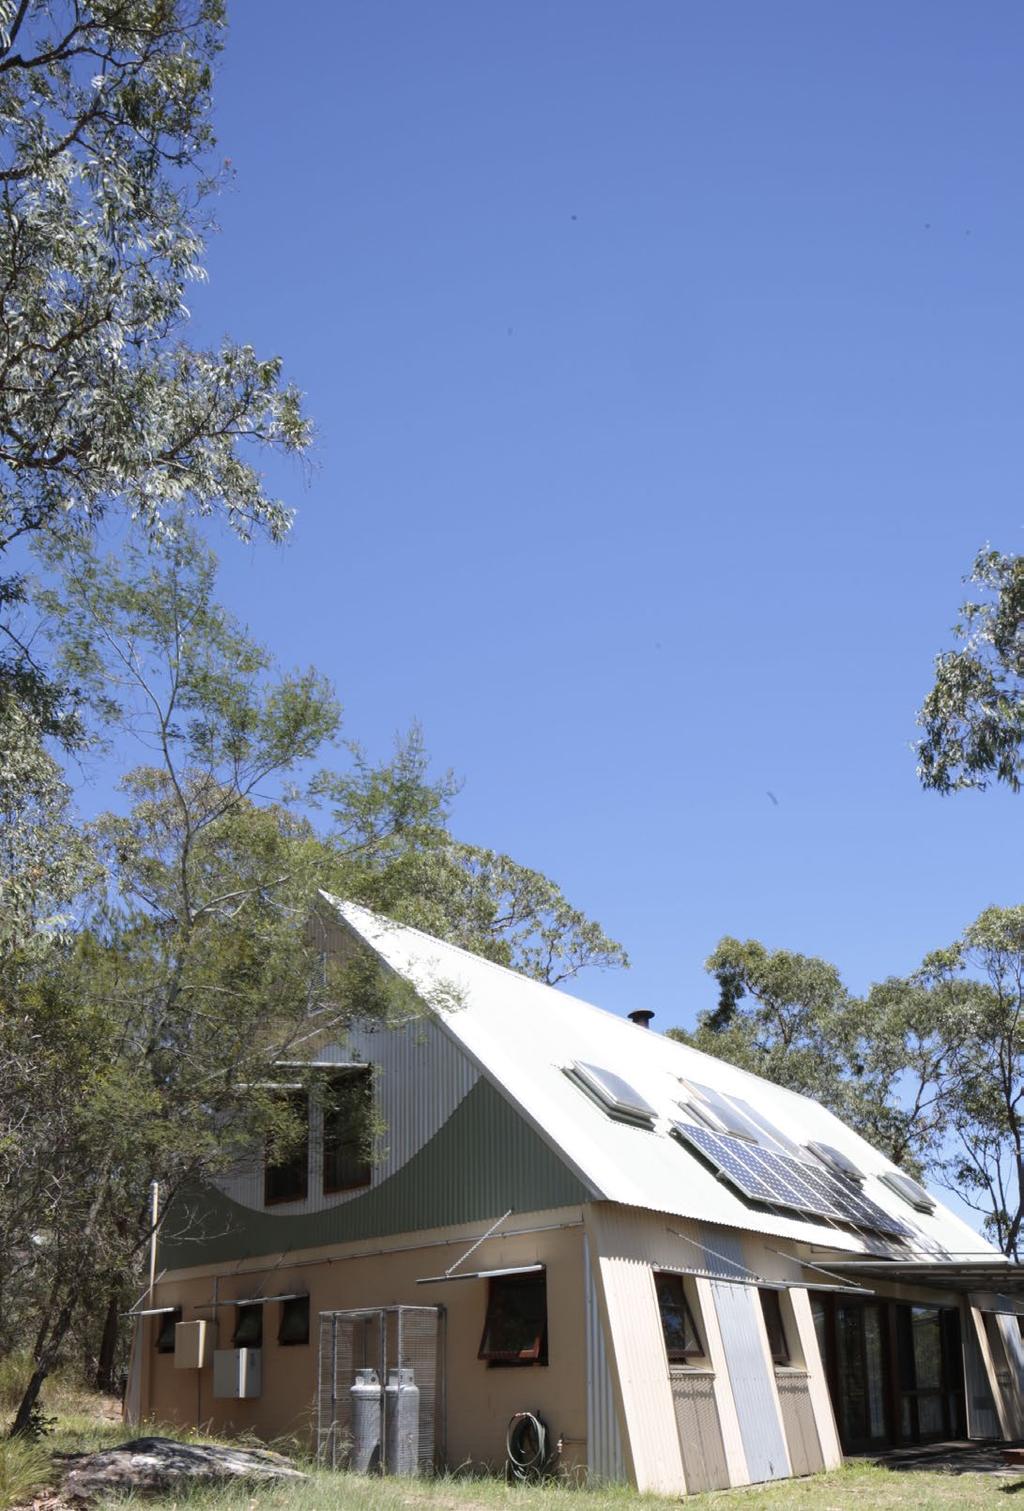 HAWKESBURY HEIGHTS YHA BUDGET GROUP ACCOMMODATION 2018 Located in one of the smallest towns in the Blue Mountains, Hawkesbury Heights YHA is a purpose built and environmentally sustainable property.